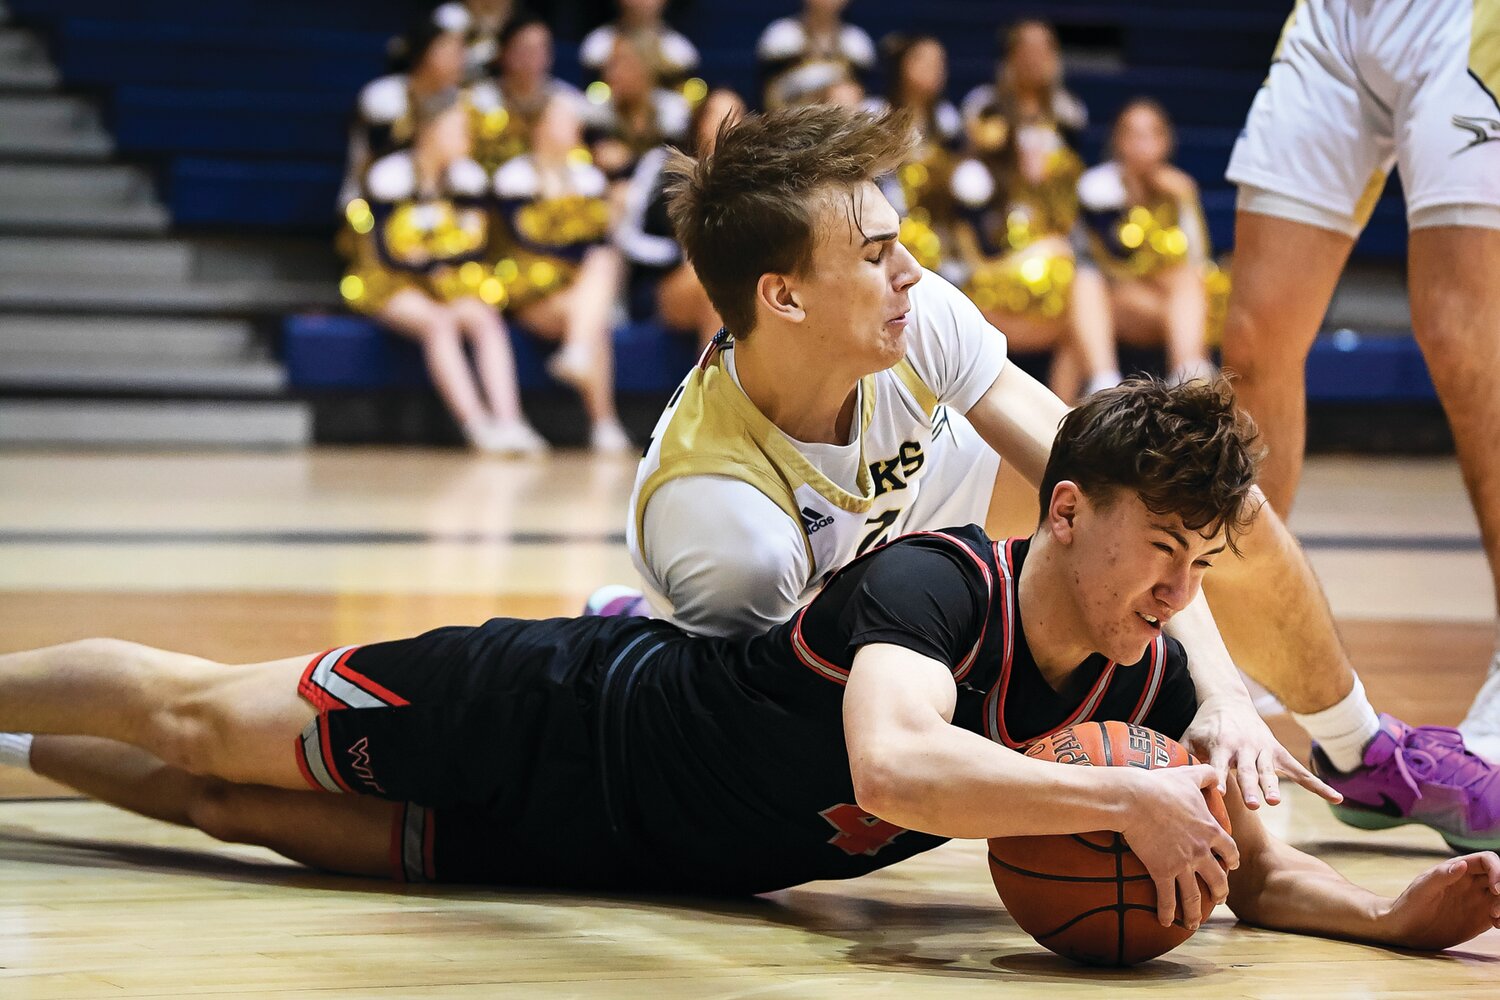 William Tennent’s Luke Torok dives for a loose ball in front of Council Rock South’s Gabe Cerulli during the first quarter.